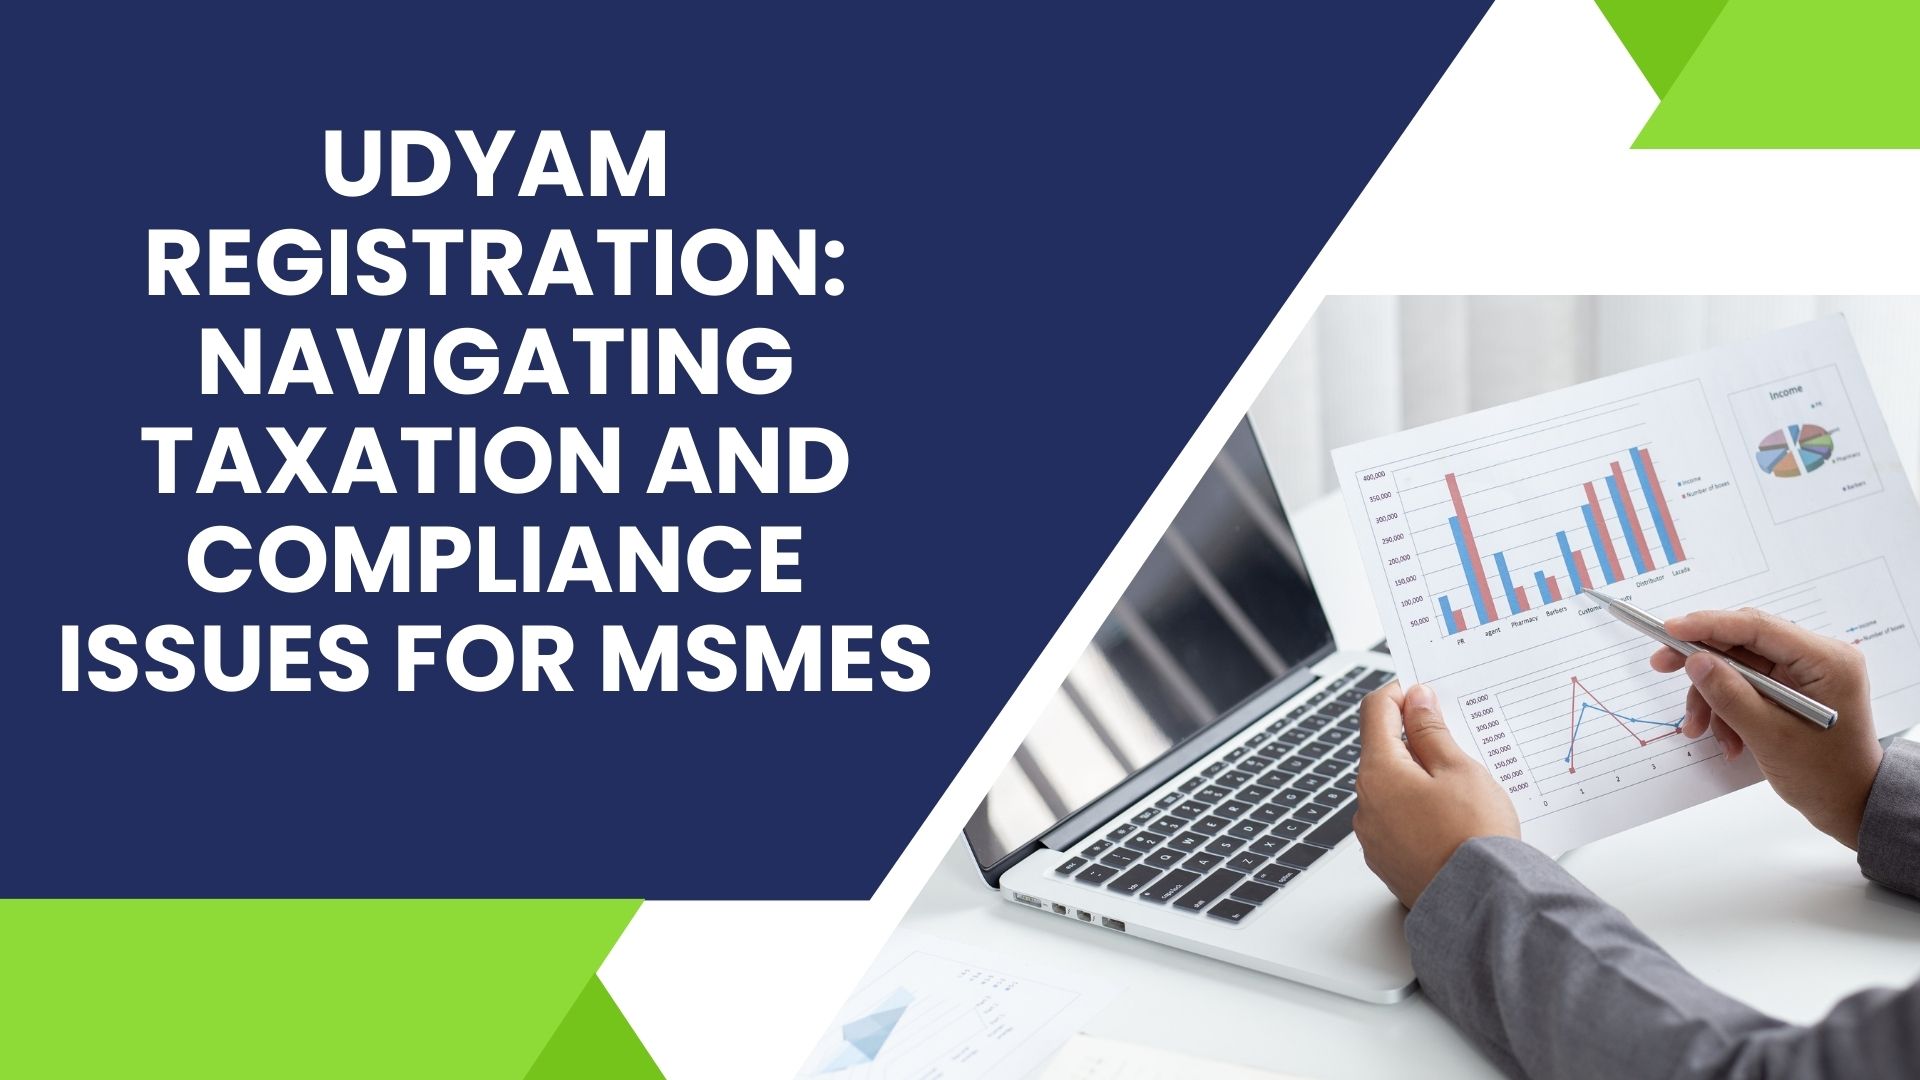 Udyam Registration: Navigating Taxation and Compliance Issues for MSMEs